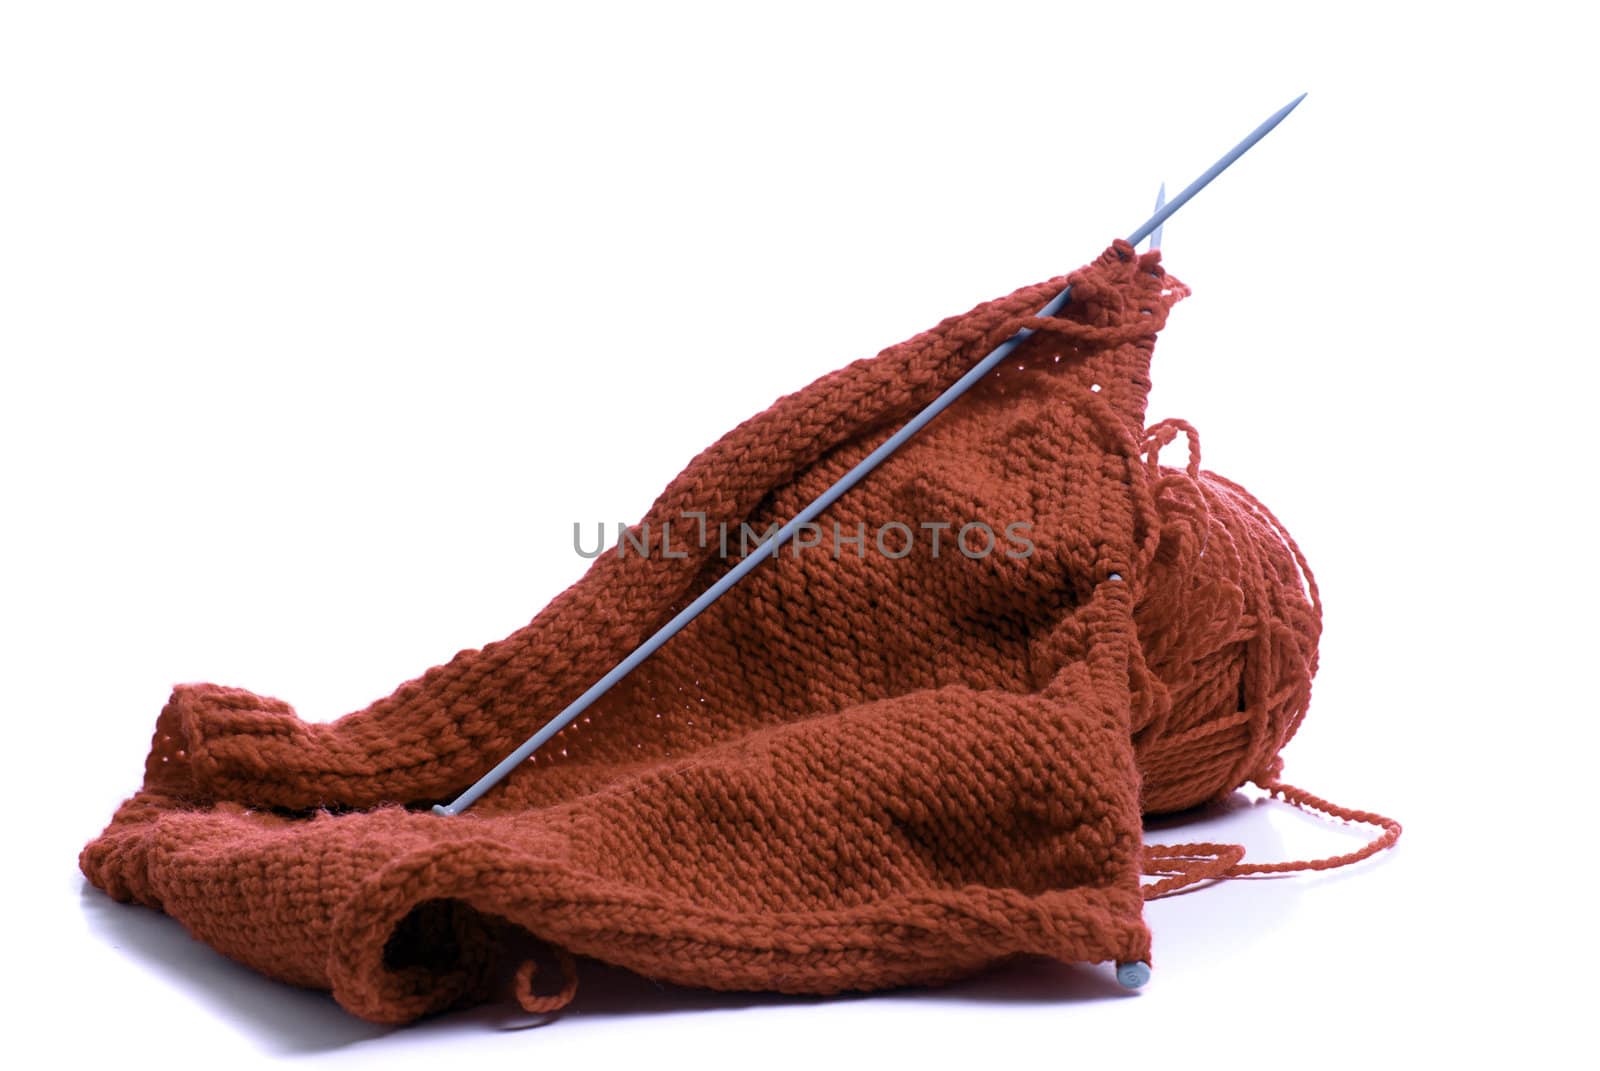 Red yarn and knitting needles, isolated against a white background